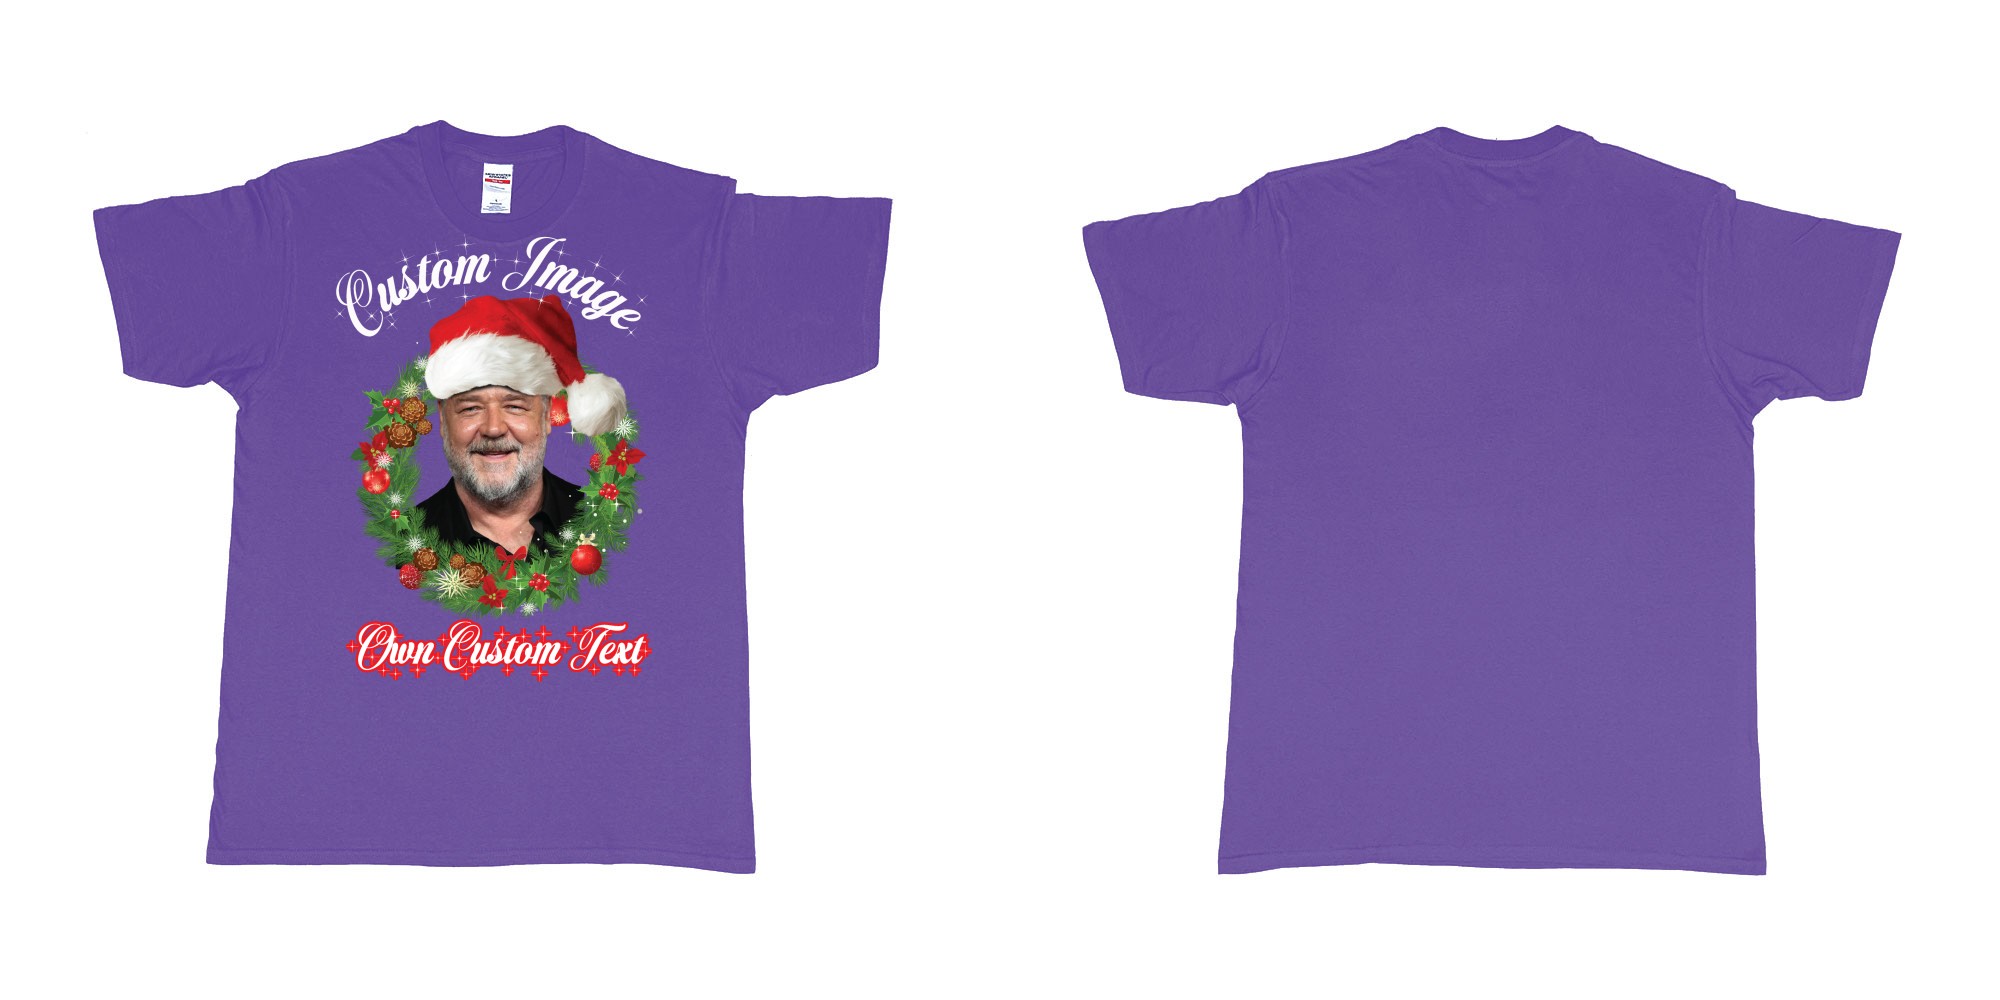 Custom tshirt design christmas wreath custom face image text in fabric color purple choice your own text made in Bali by The Pirate Way